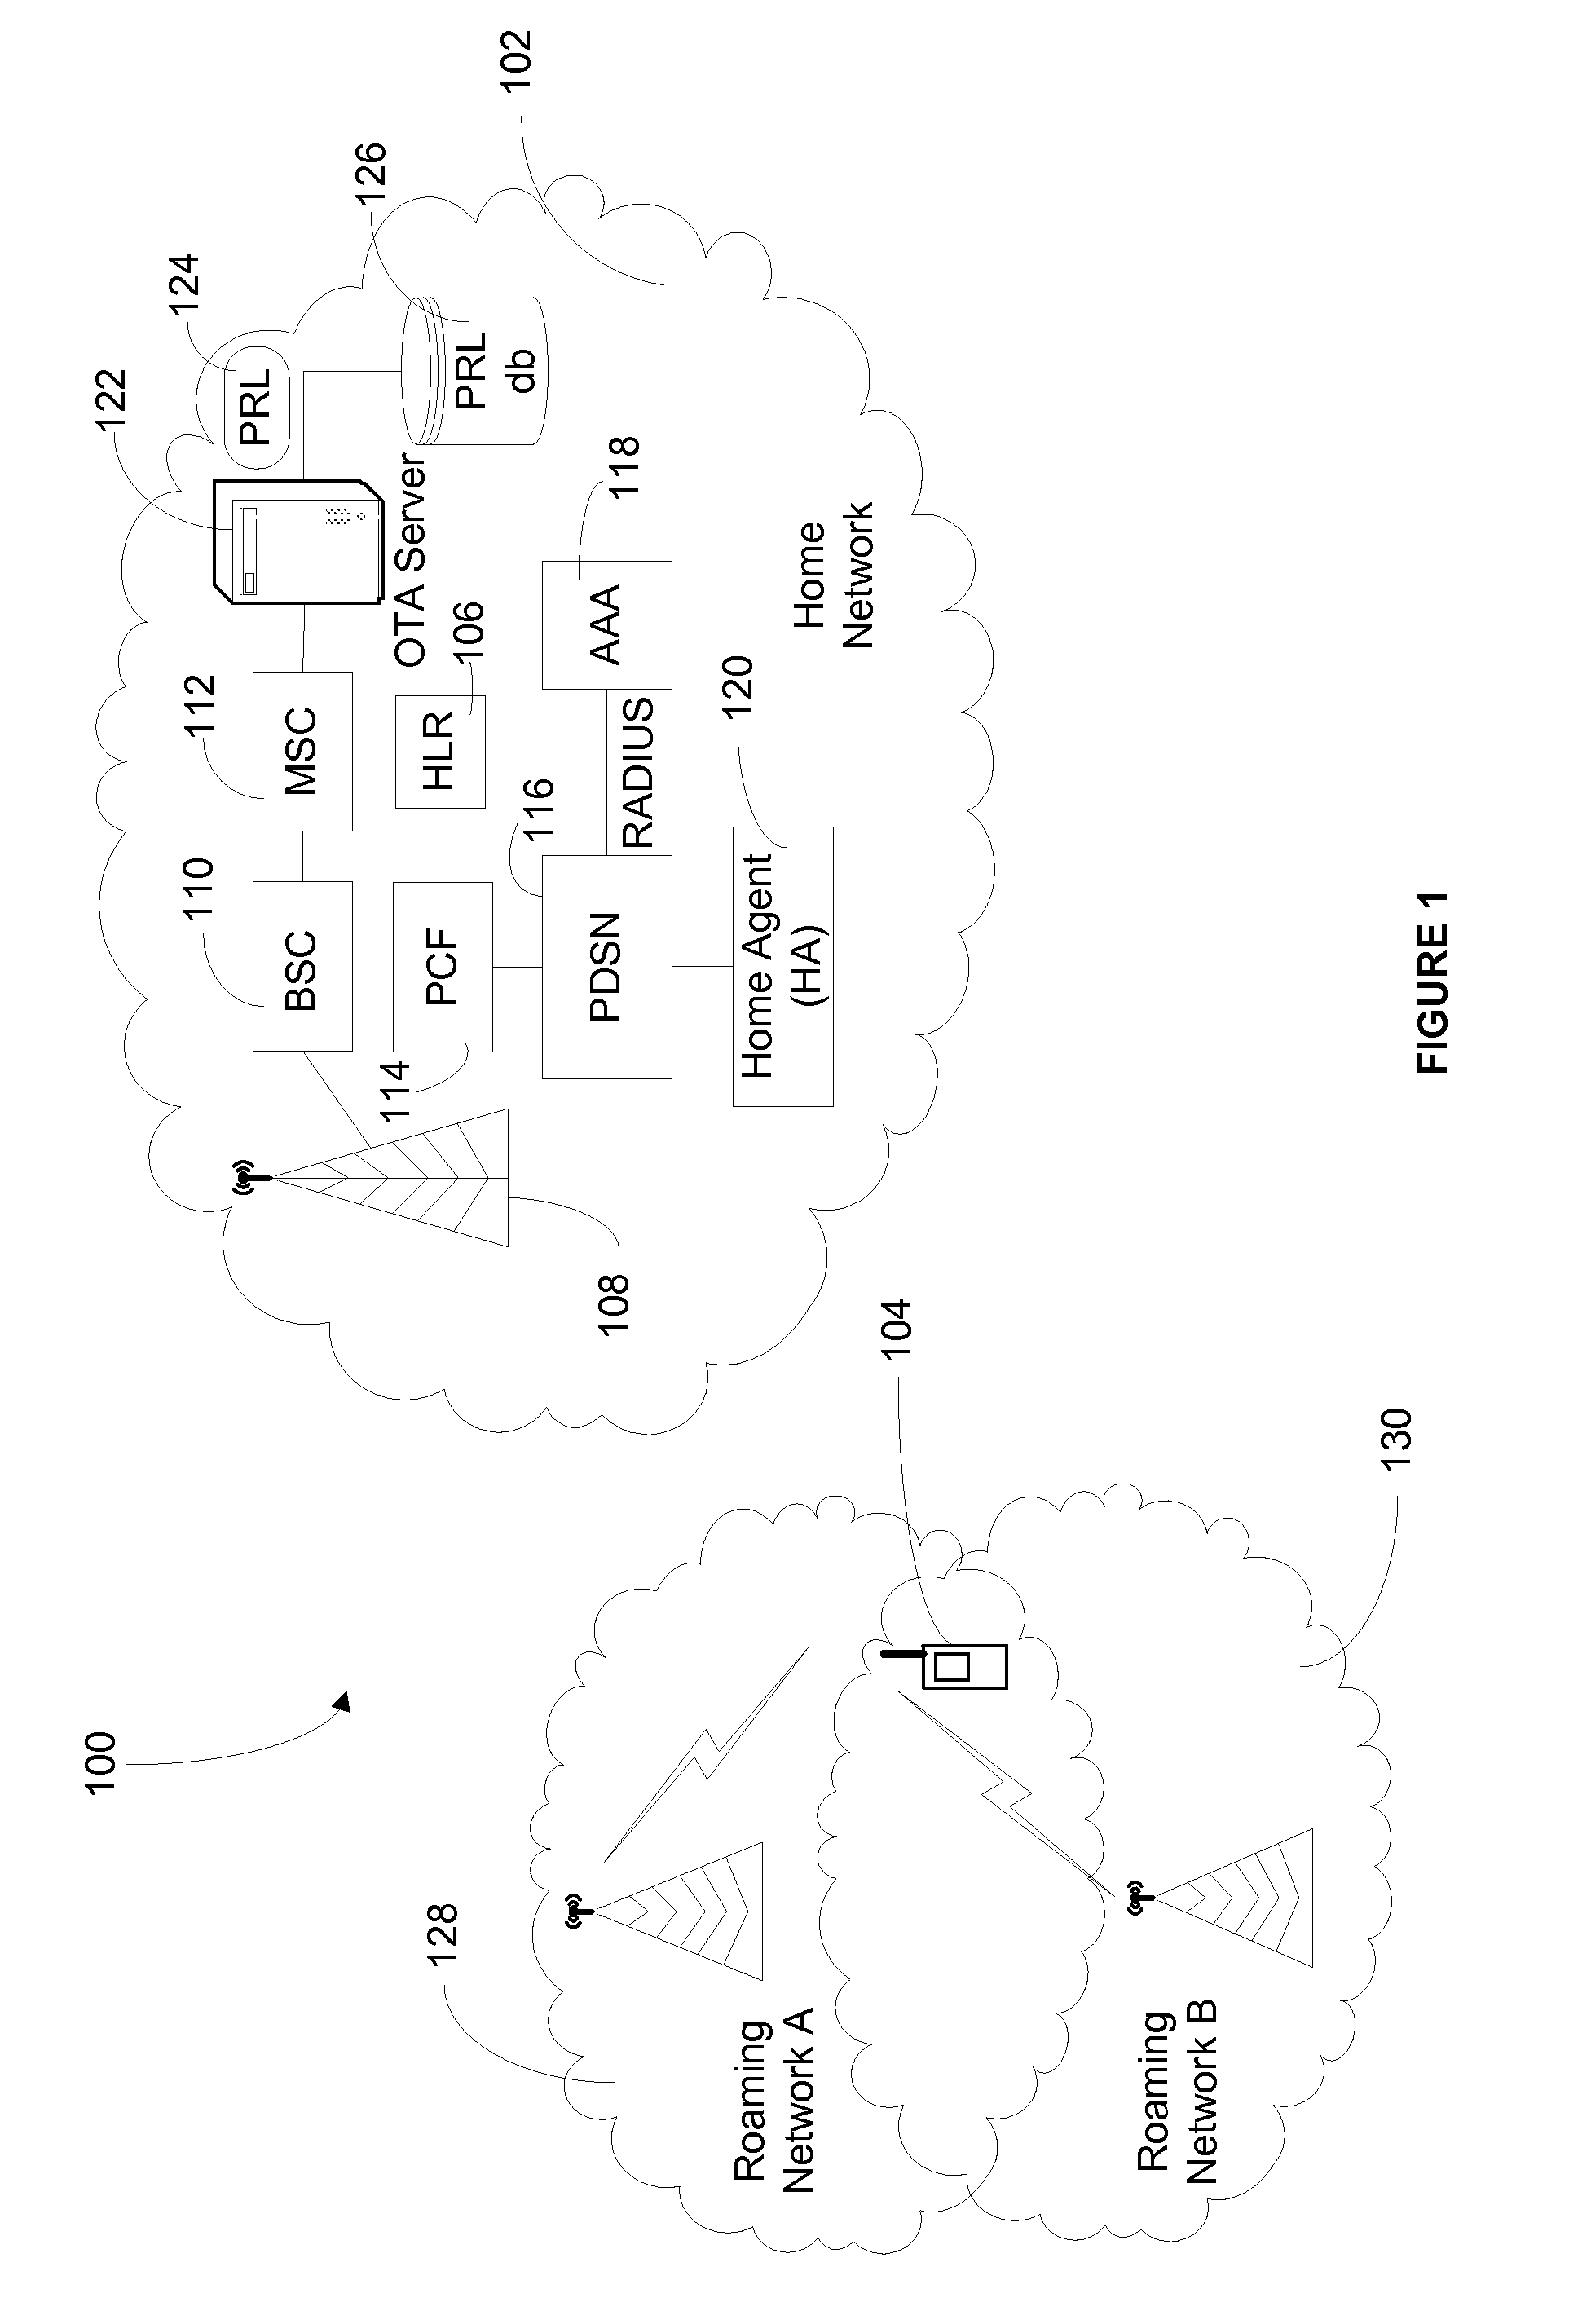 System selection based on service-specific preferred roaming list in a wireless network